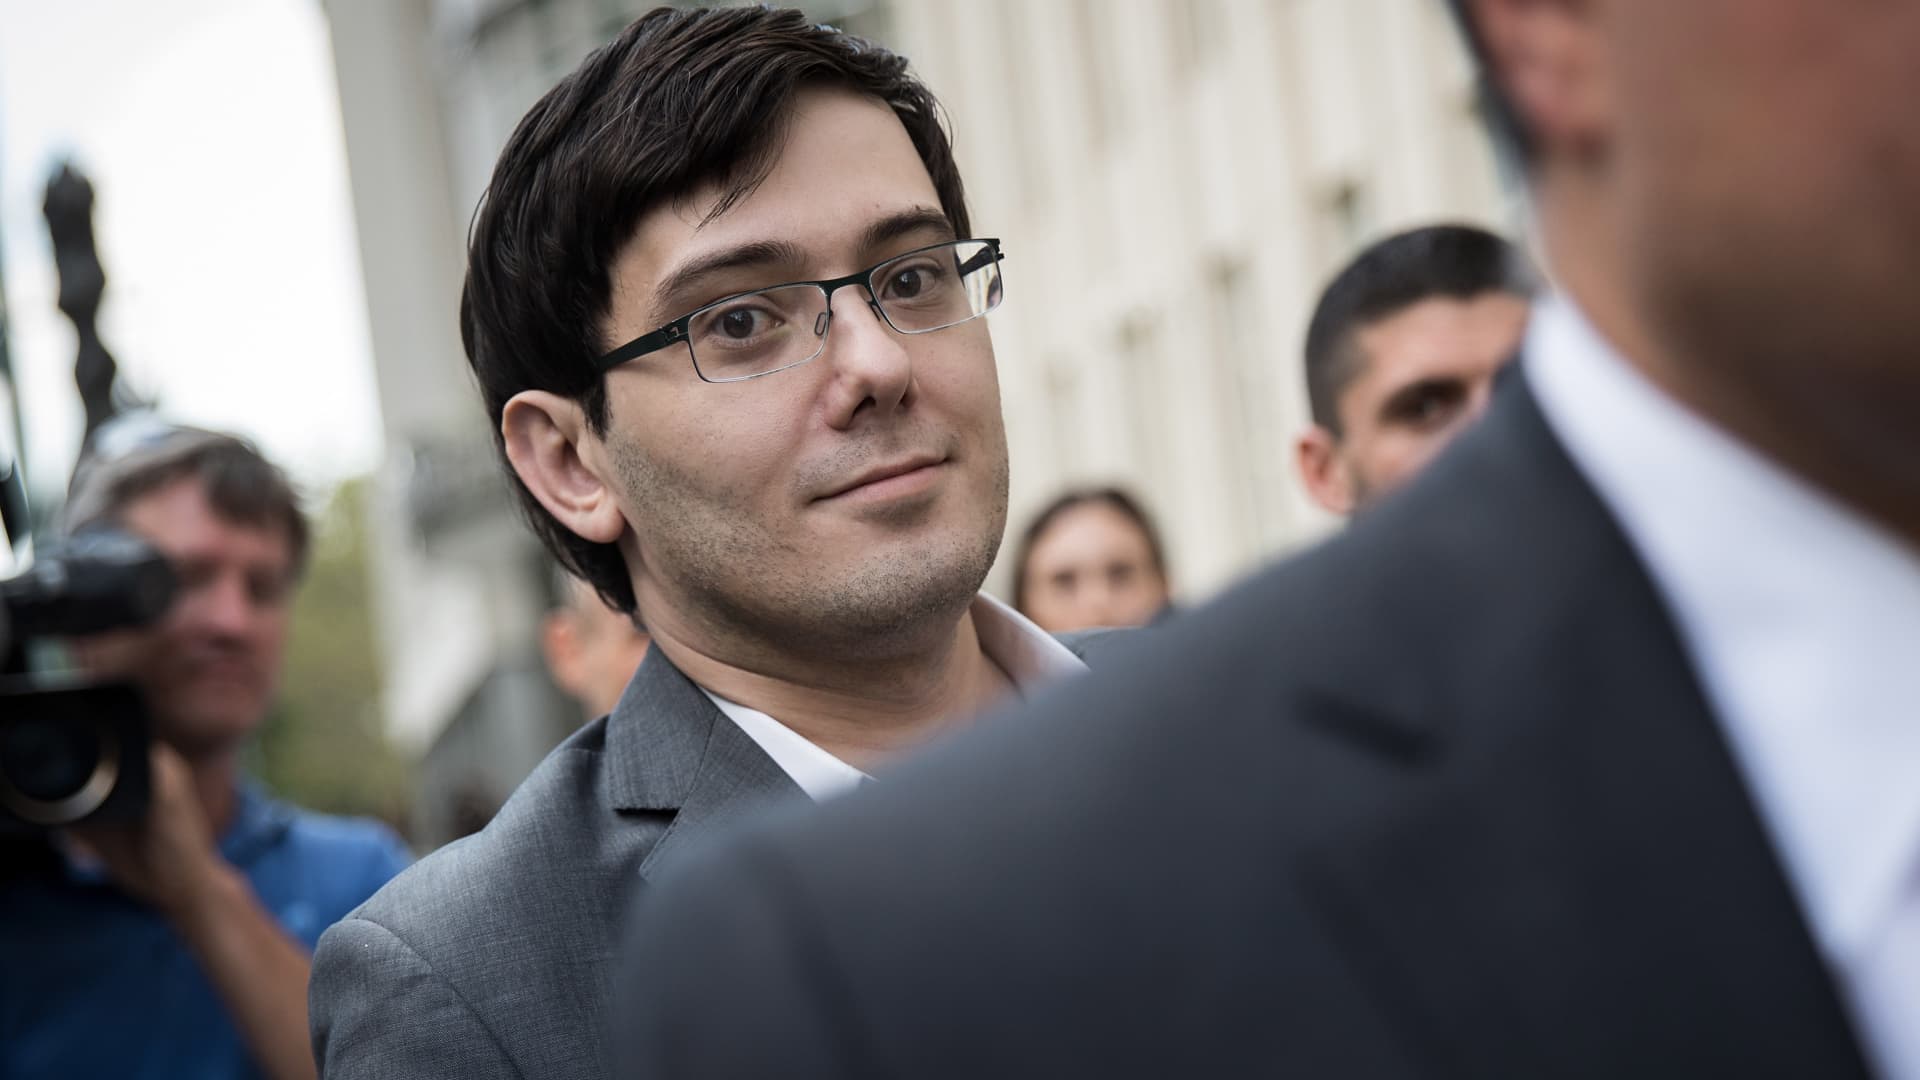 'Pharma bro' Martin Shkreli released from federal prison and into New York halfway house